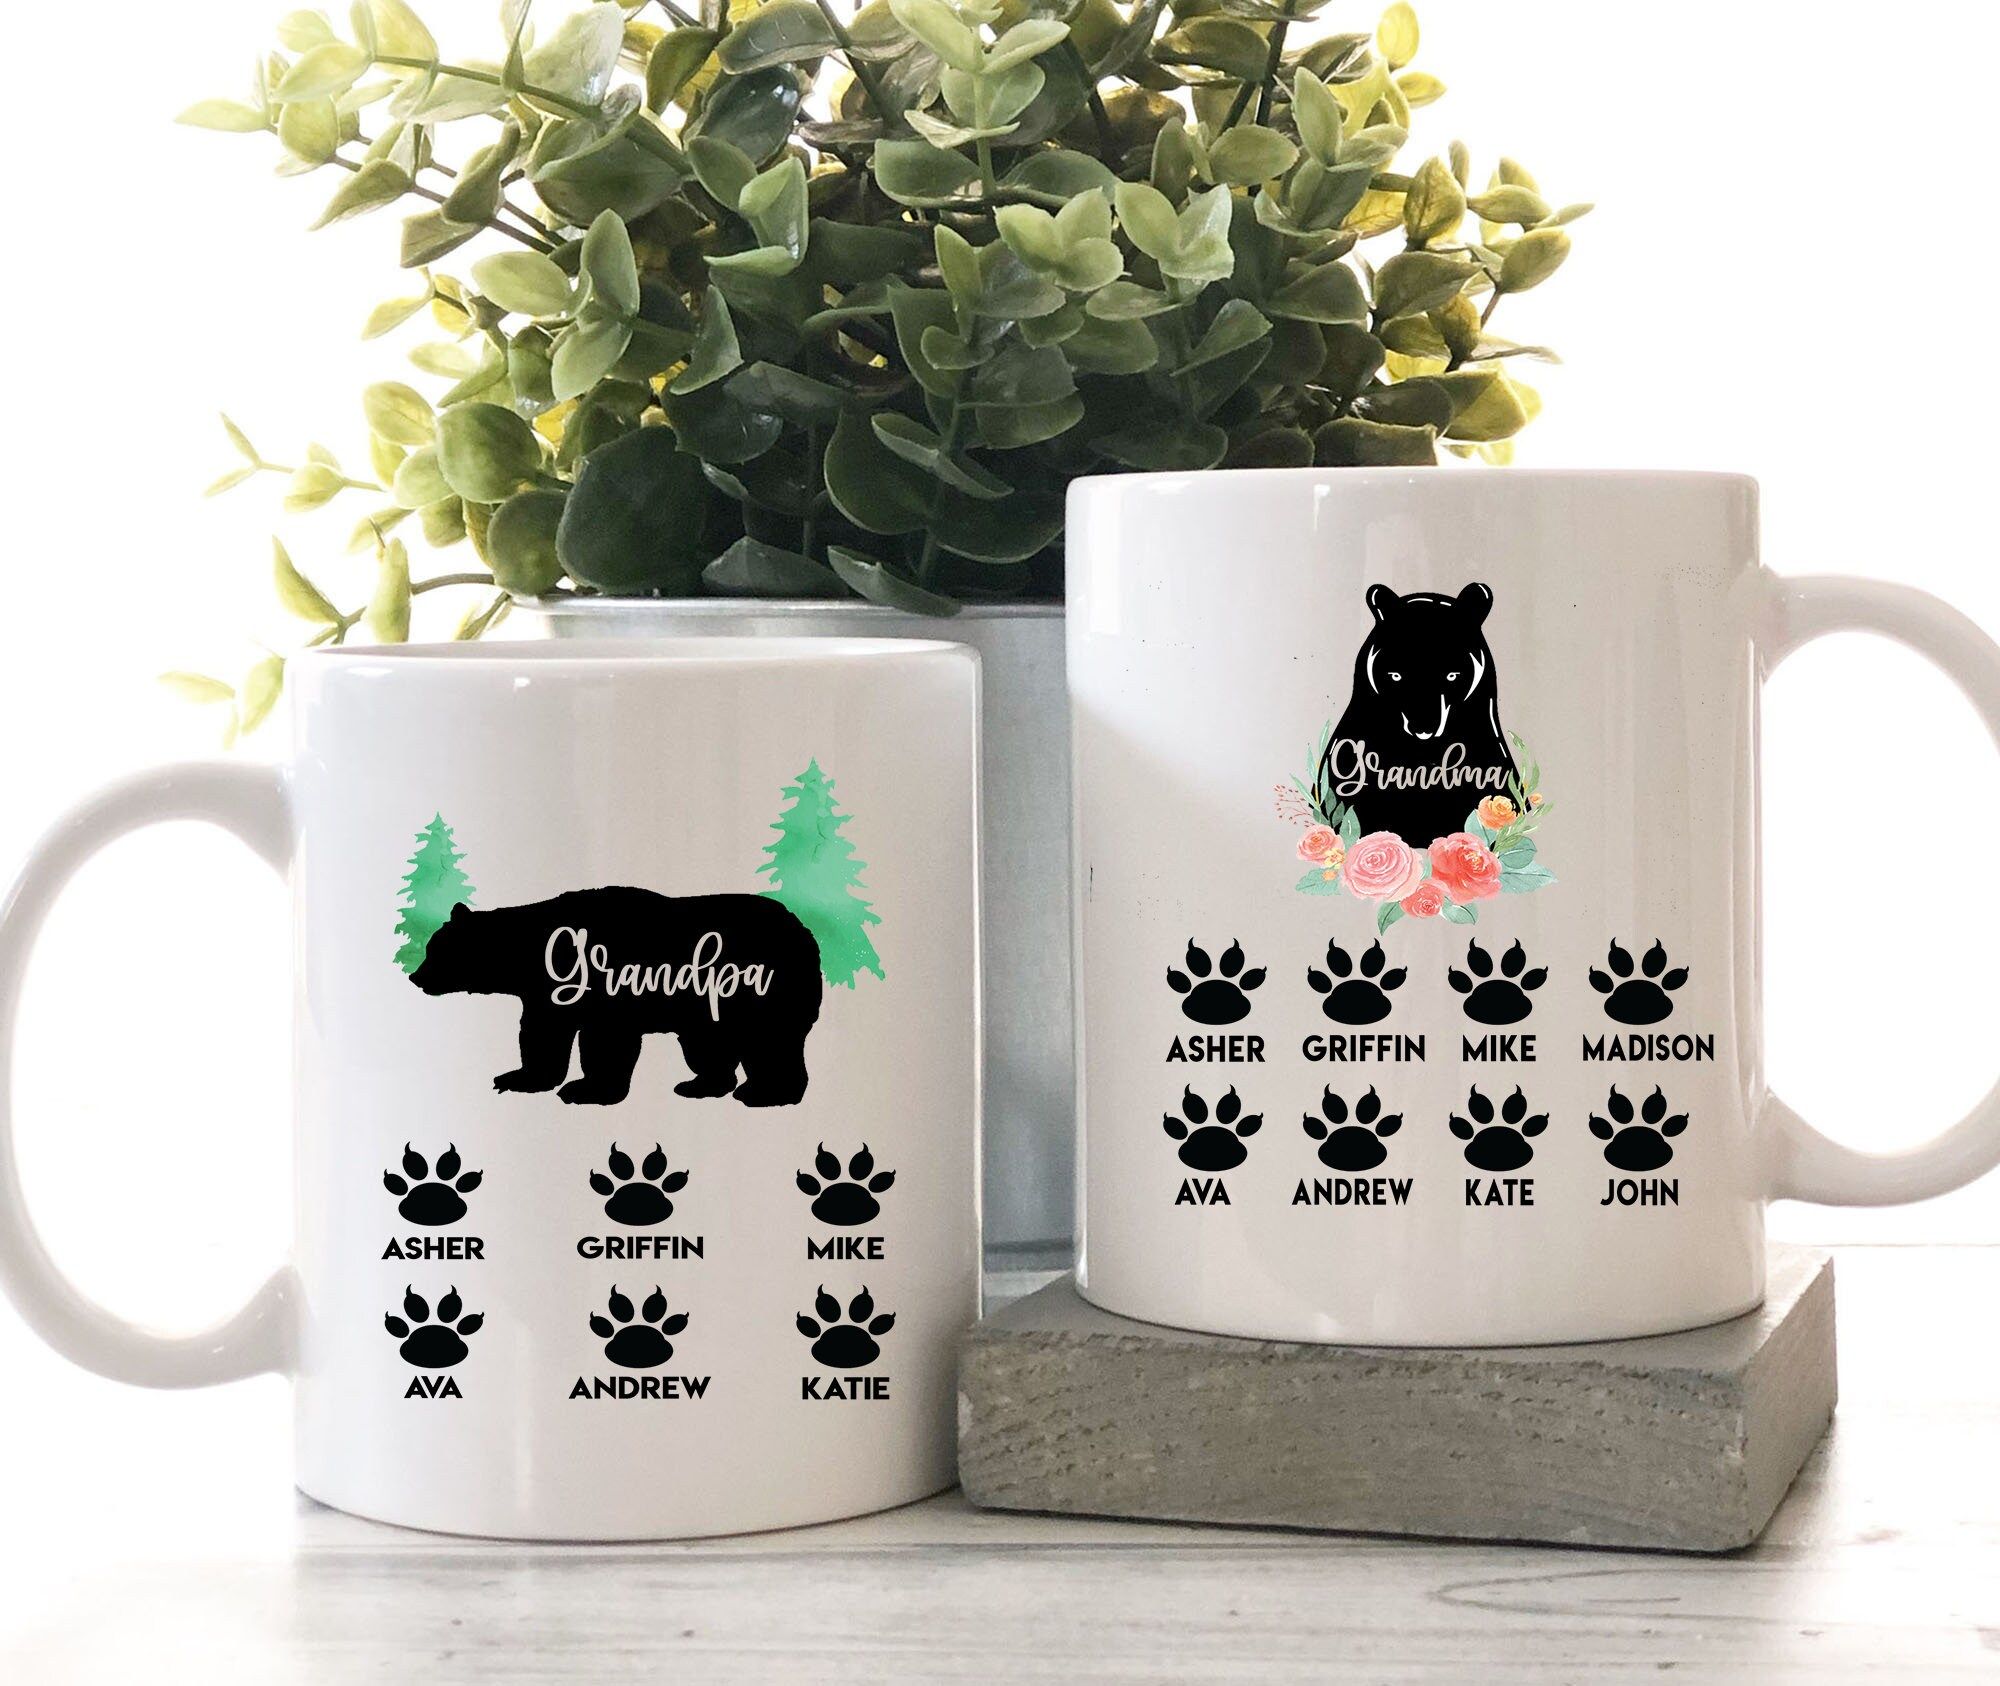 The 50 Best and Enticing Gifts for Grandparents in 2022, Personalizable Grandma and Grandpa Ceramic Mug Set